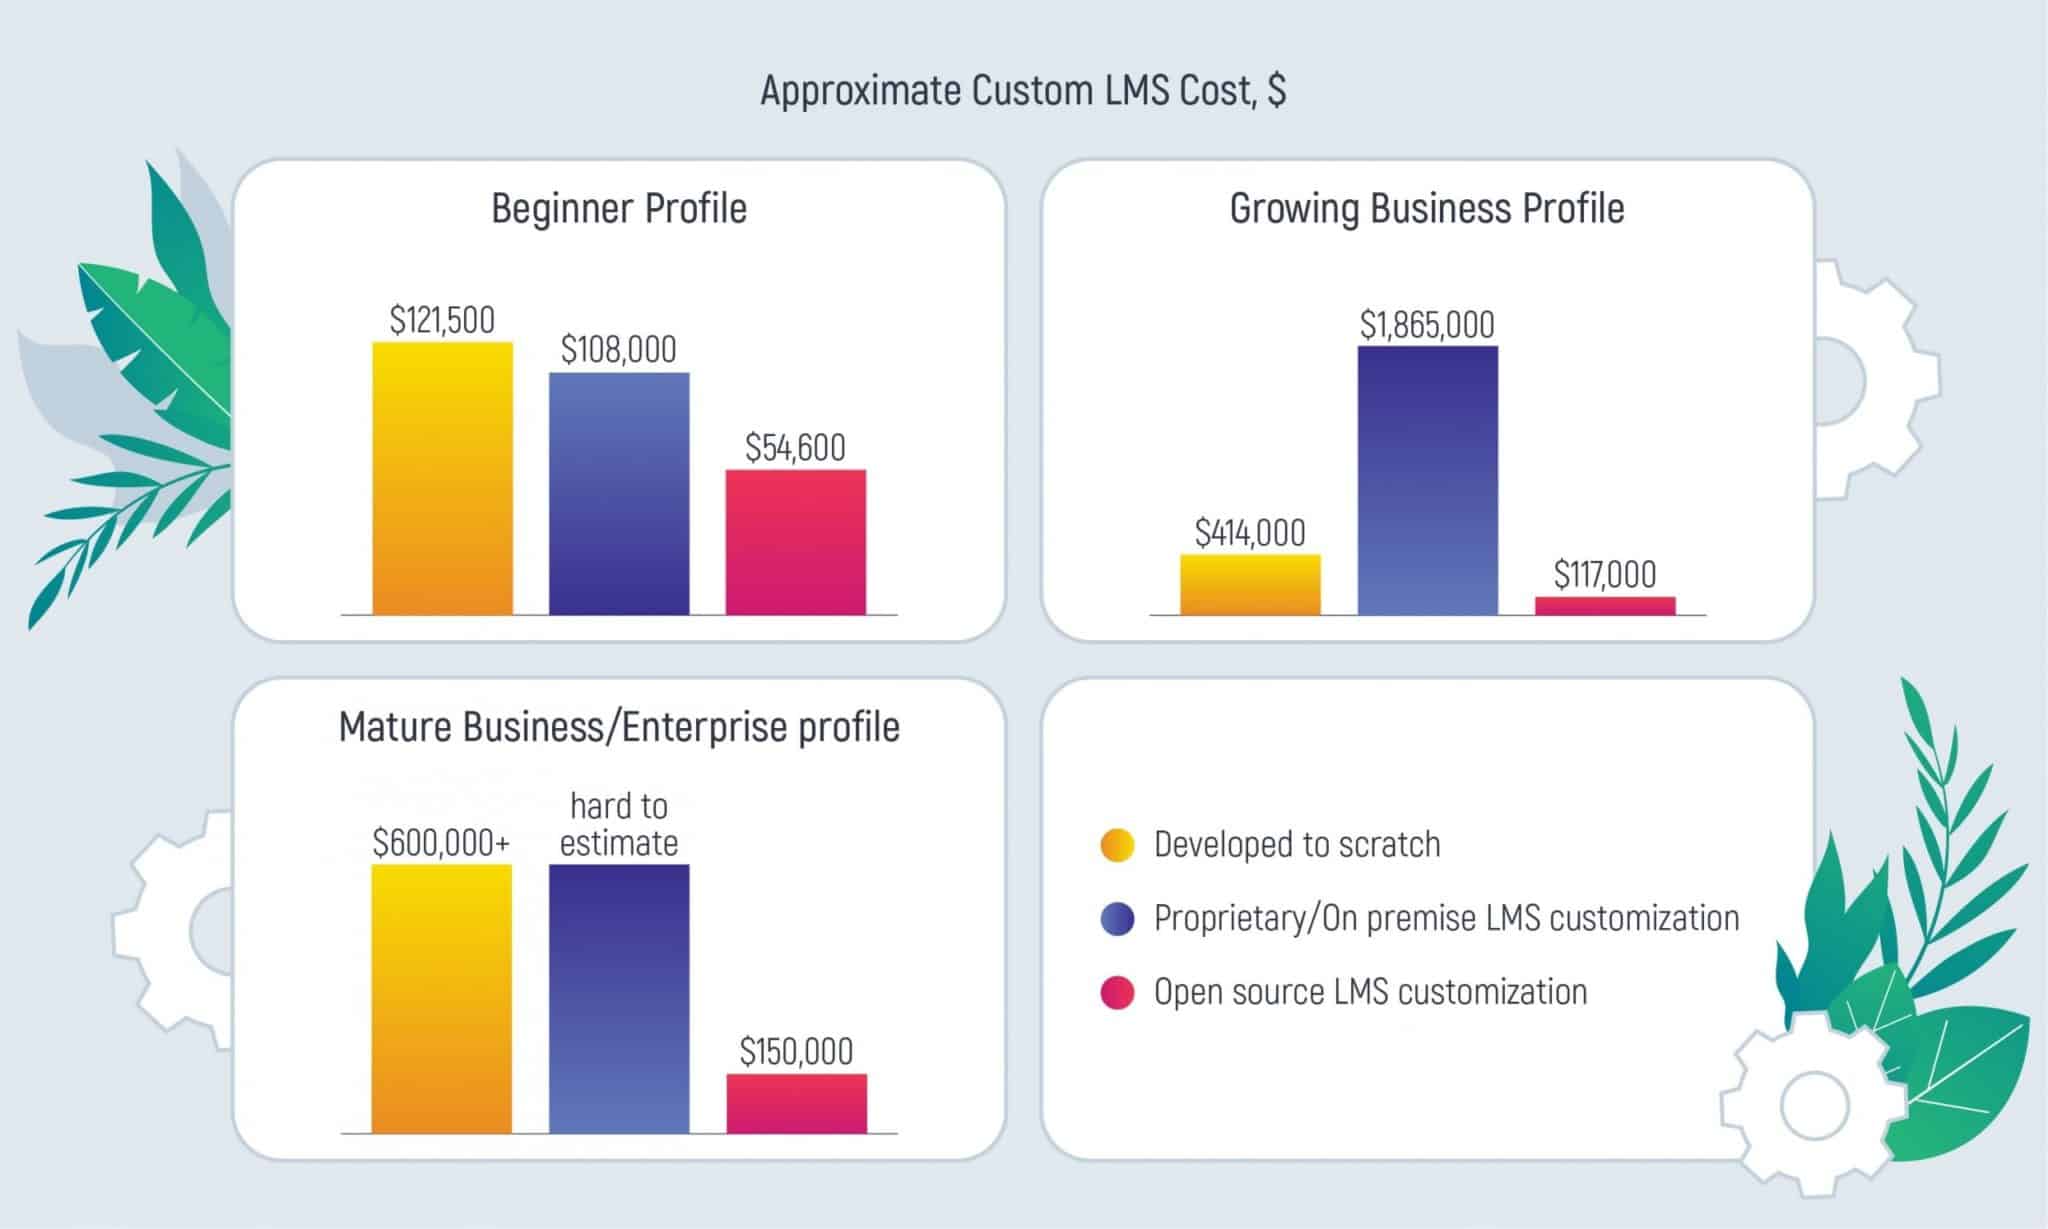 How Much Does It Cost to Create a Custom LMS?